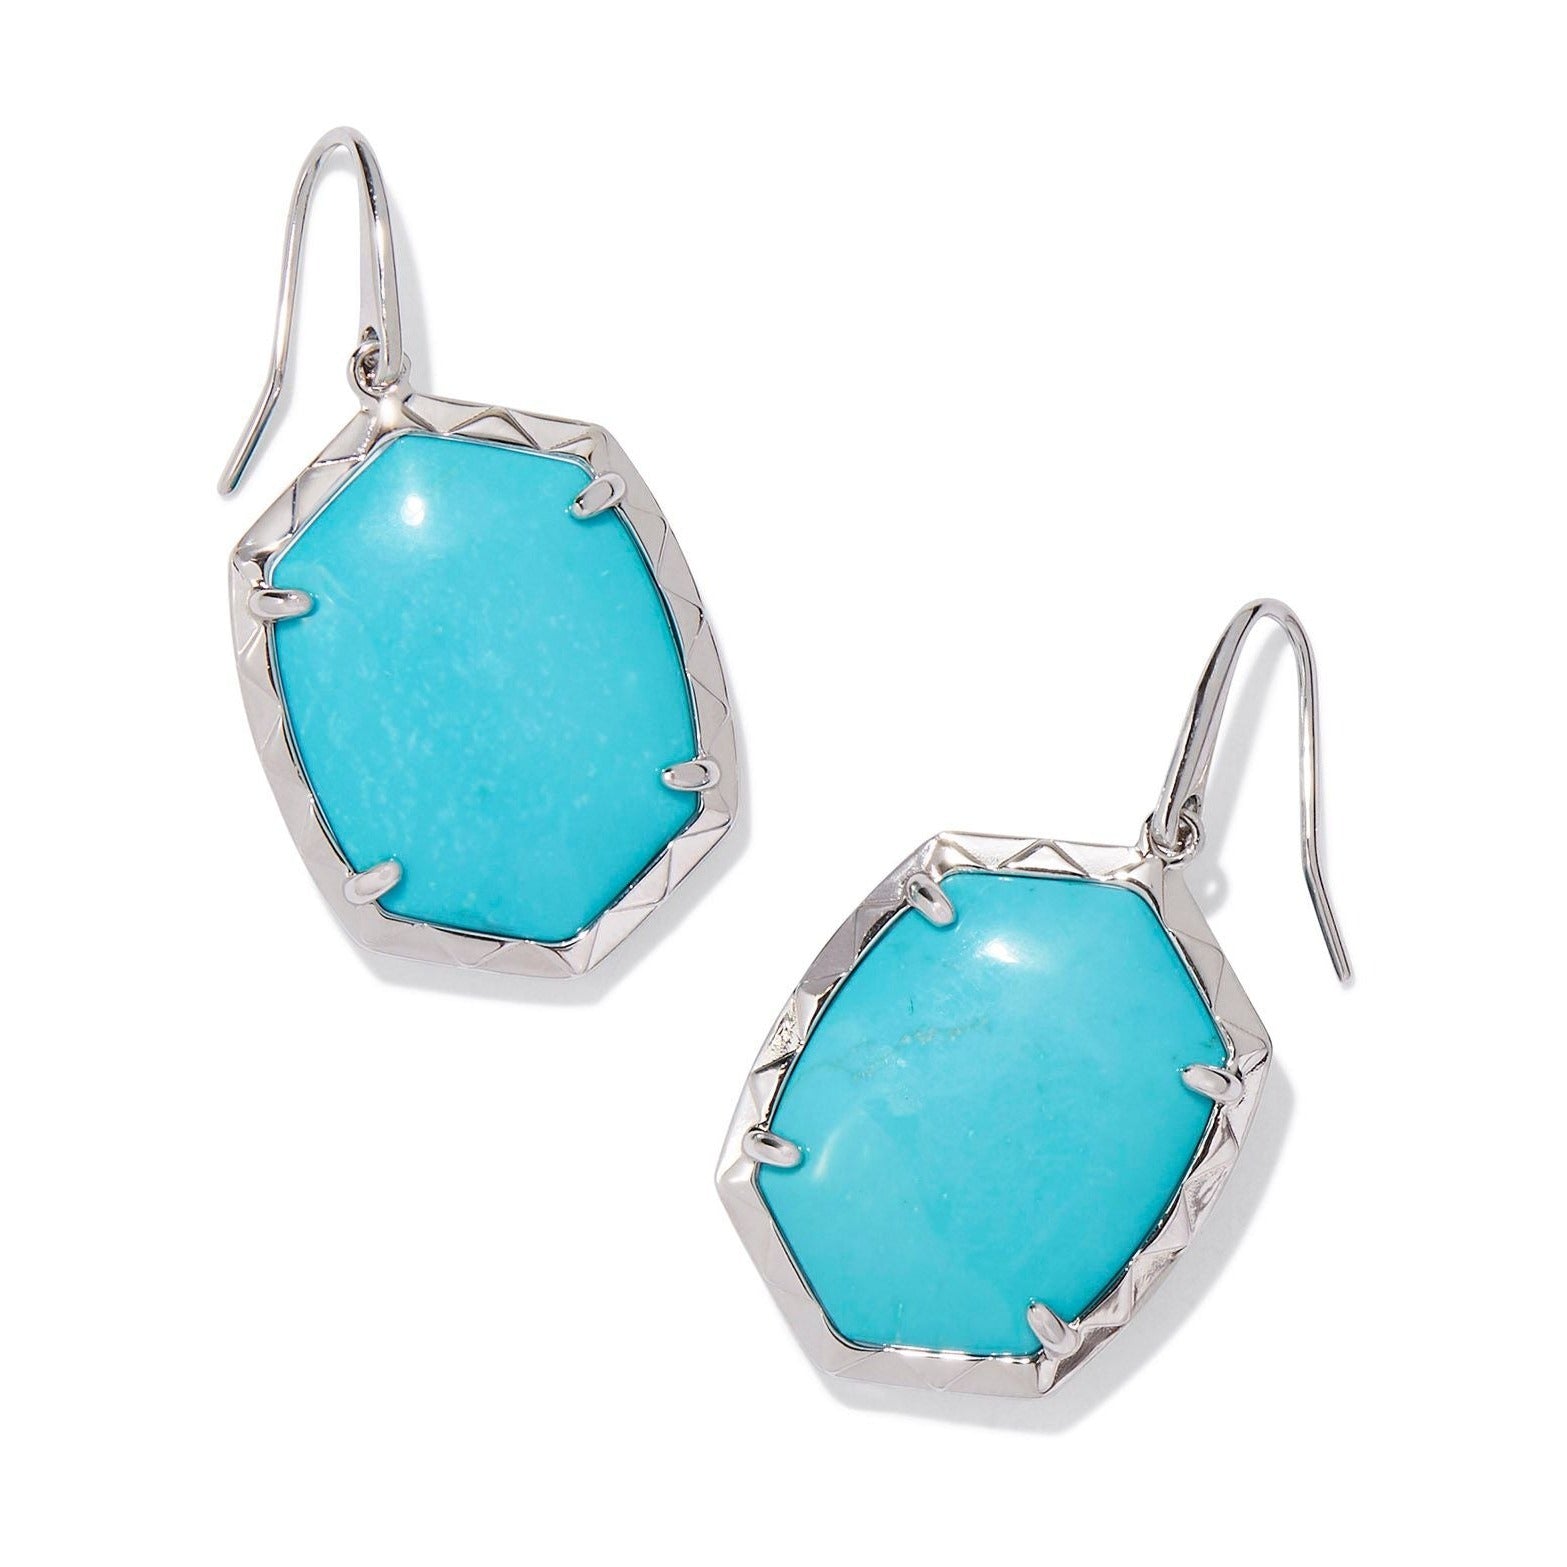 Kendra Scott | Daphne Silver Drop Earrings in Variegated Turquoise Magnesite - Giddy Up Glamour Boutique